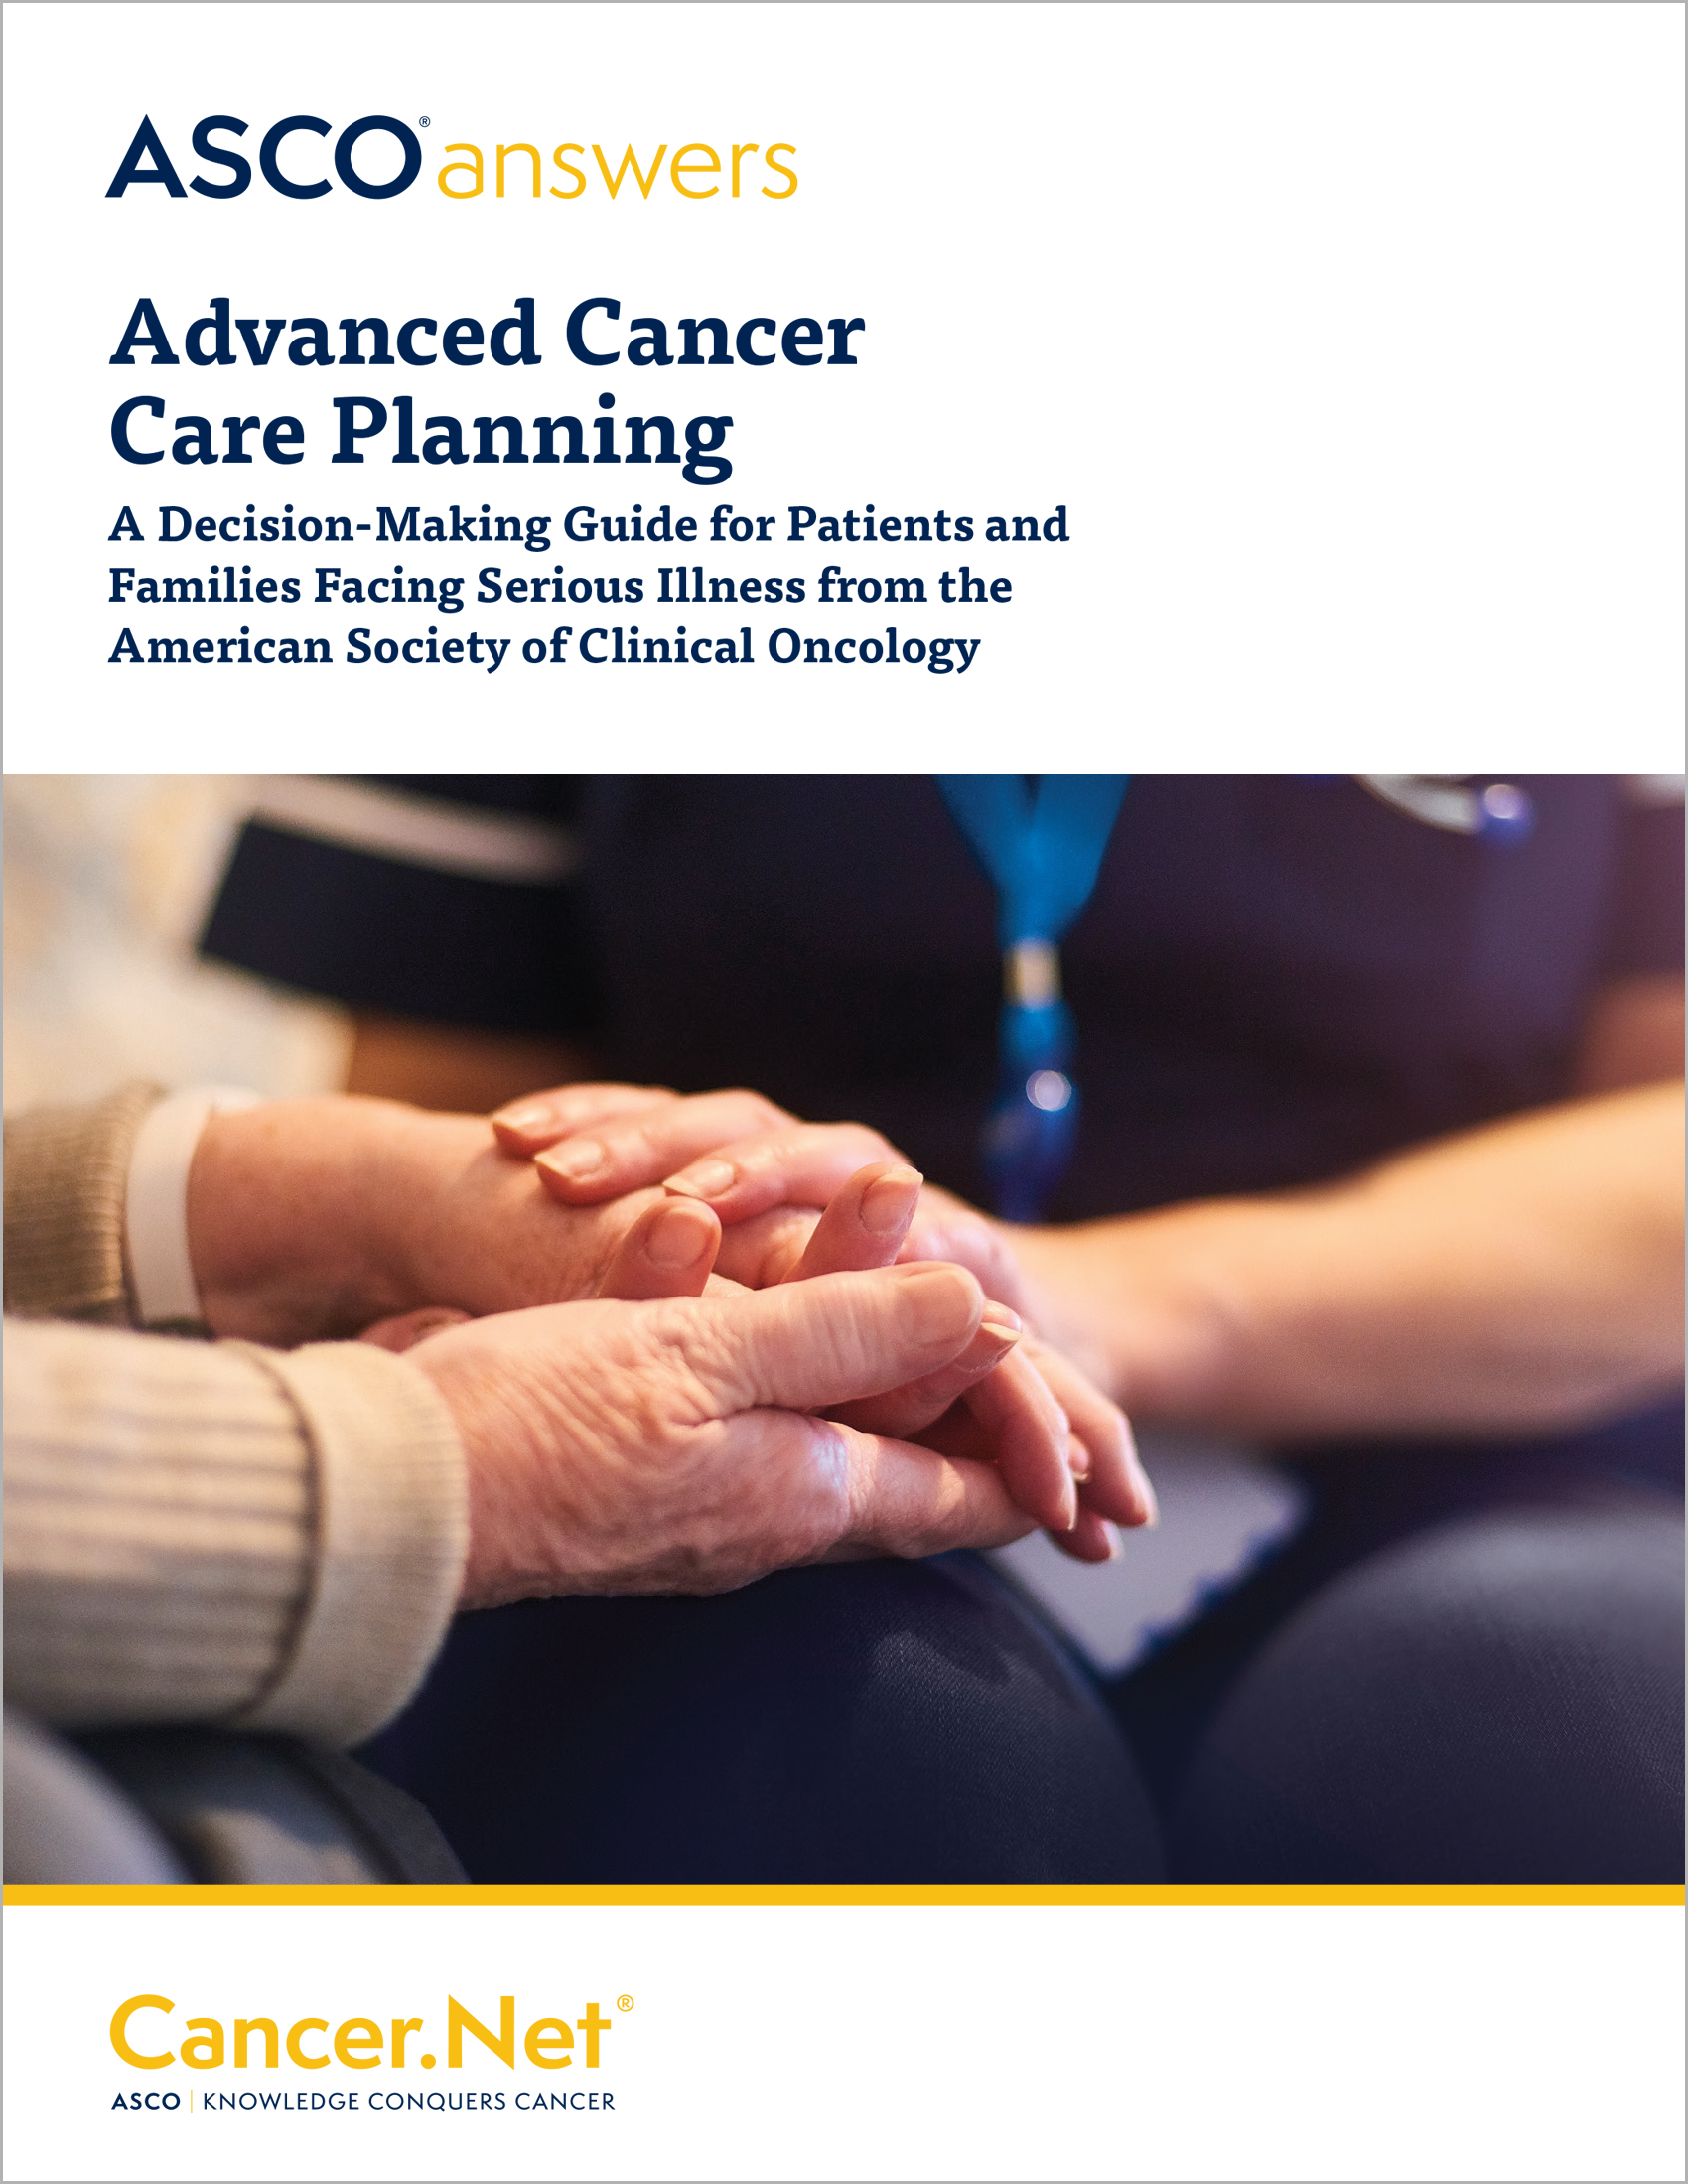 ASCO Answers: Advanced Cancer Care Planning